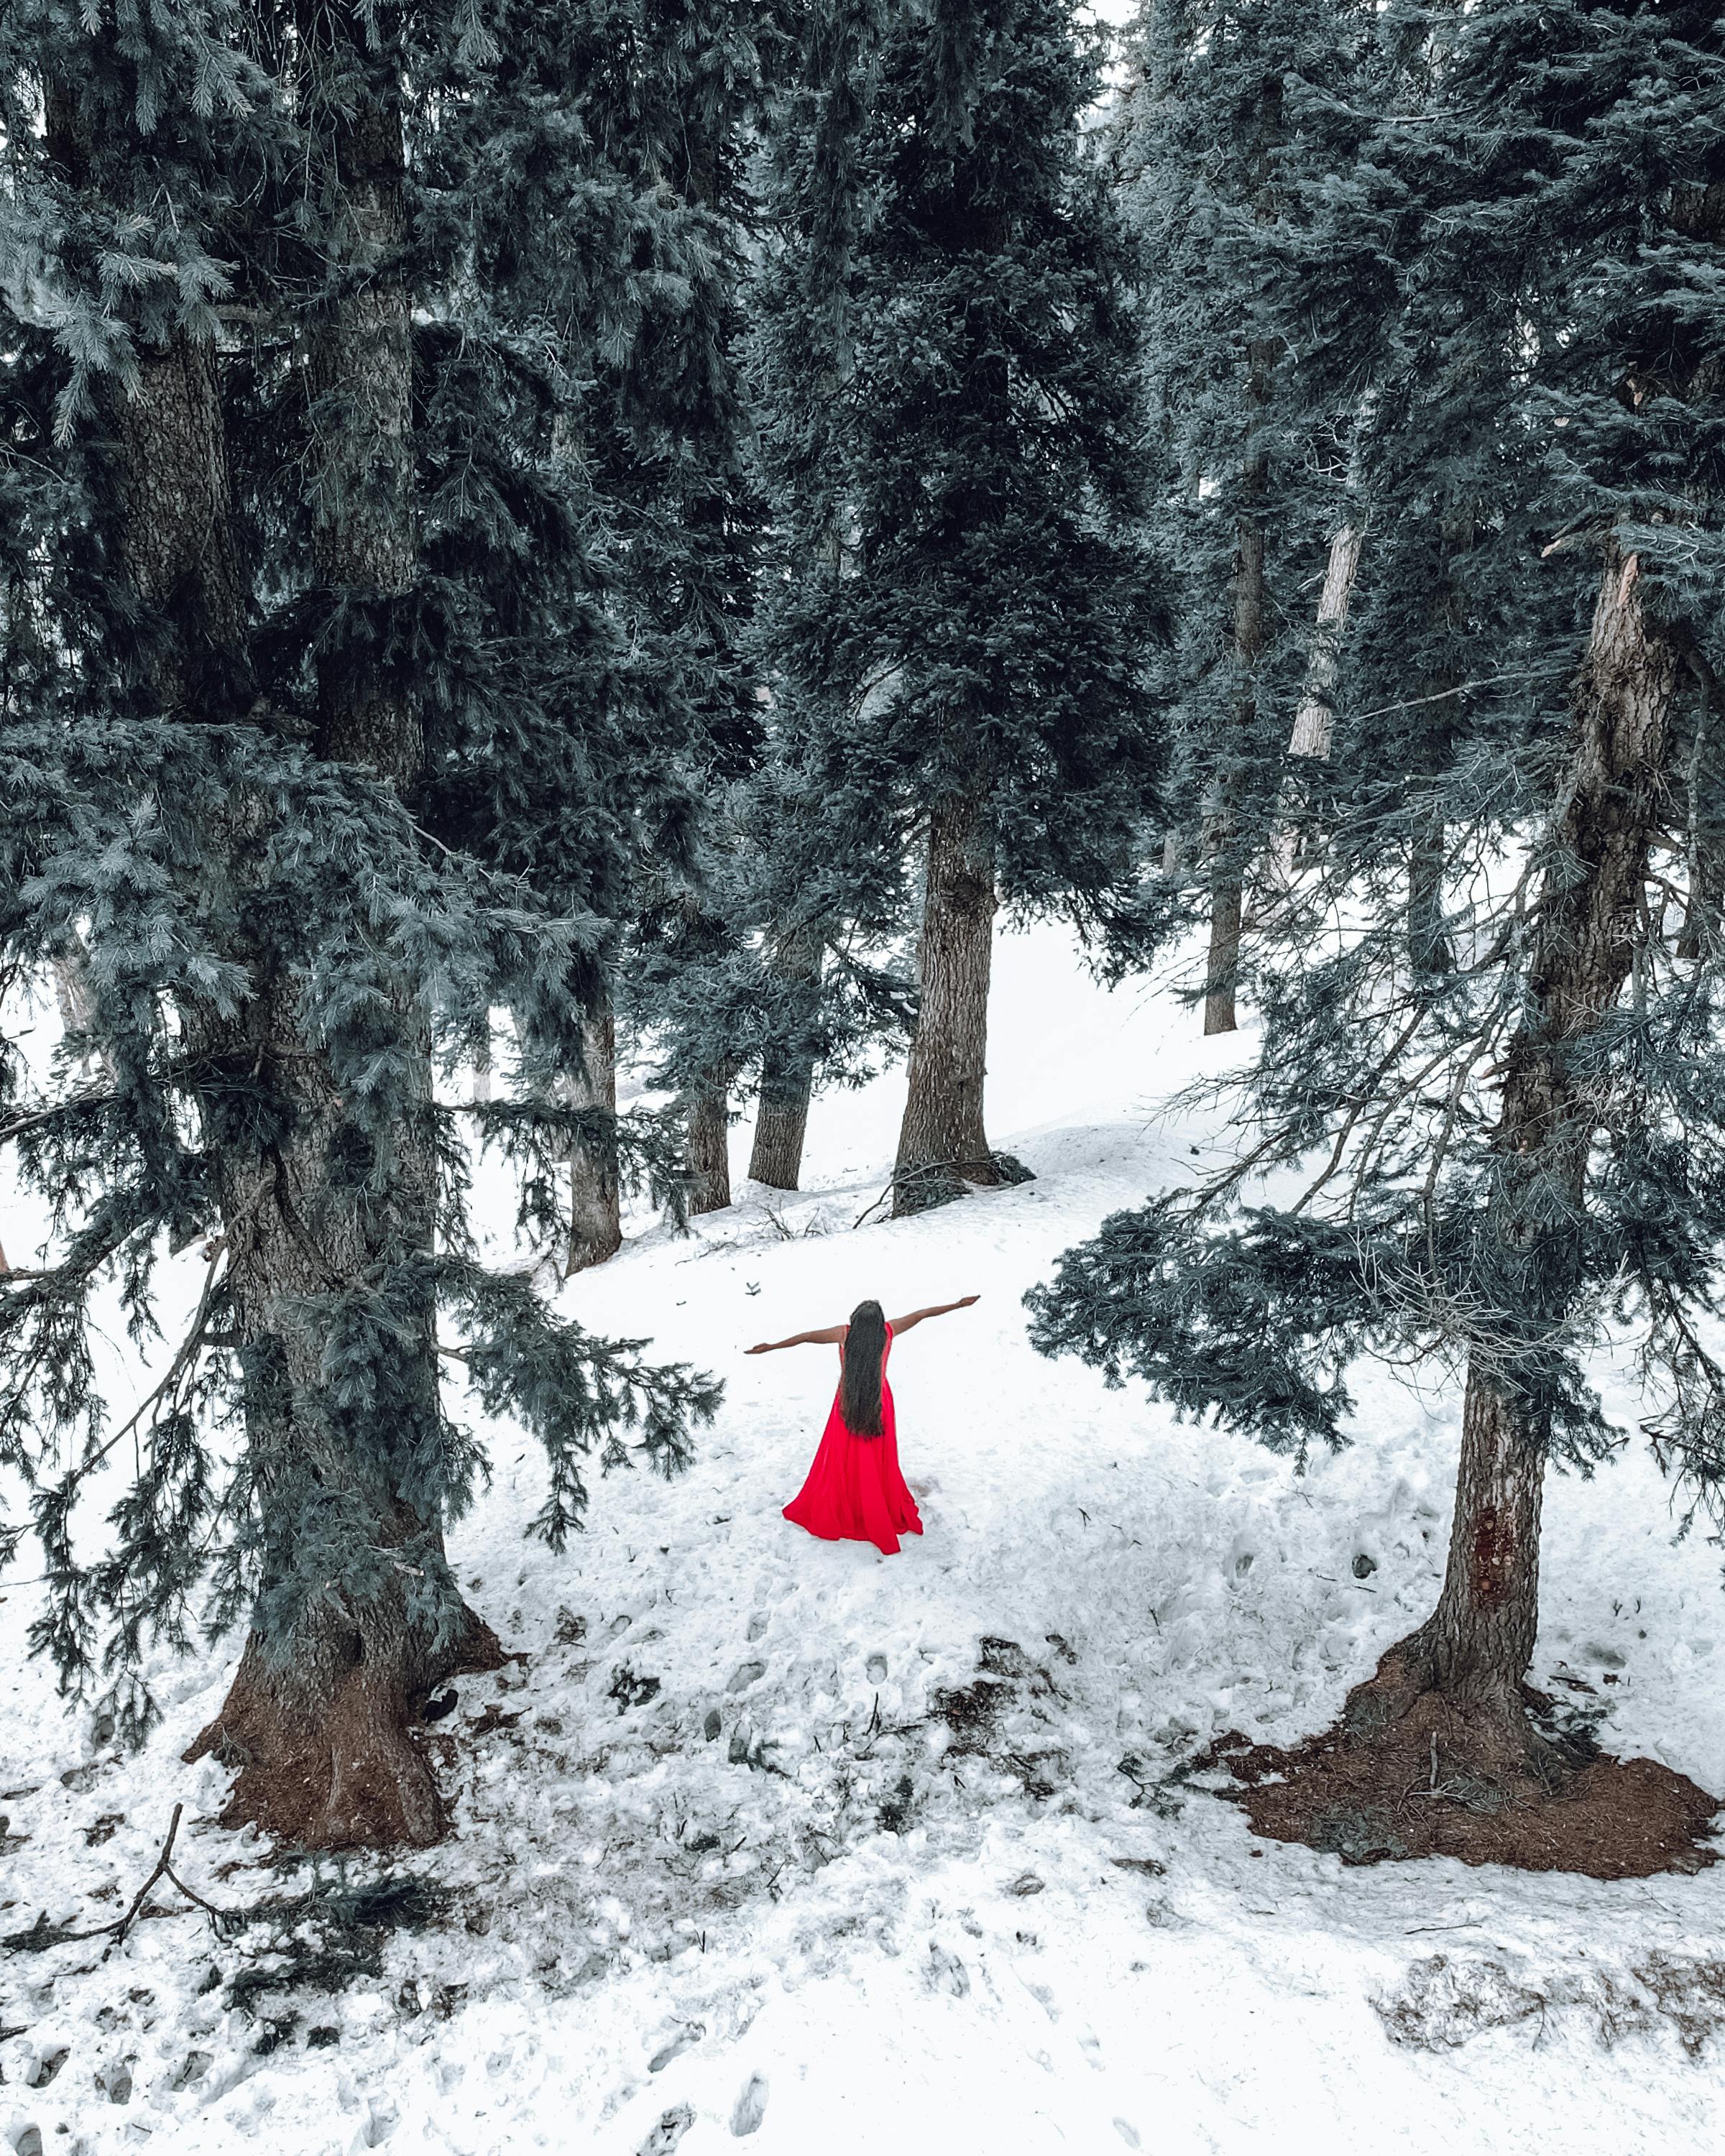 Girl in a red dress in snowy forest. Her long dress lying on snow